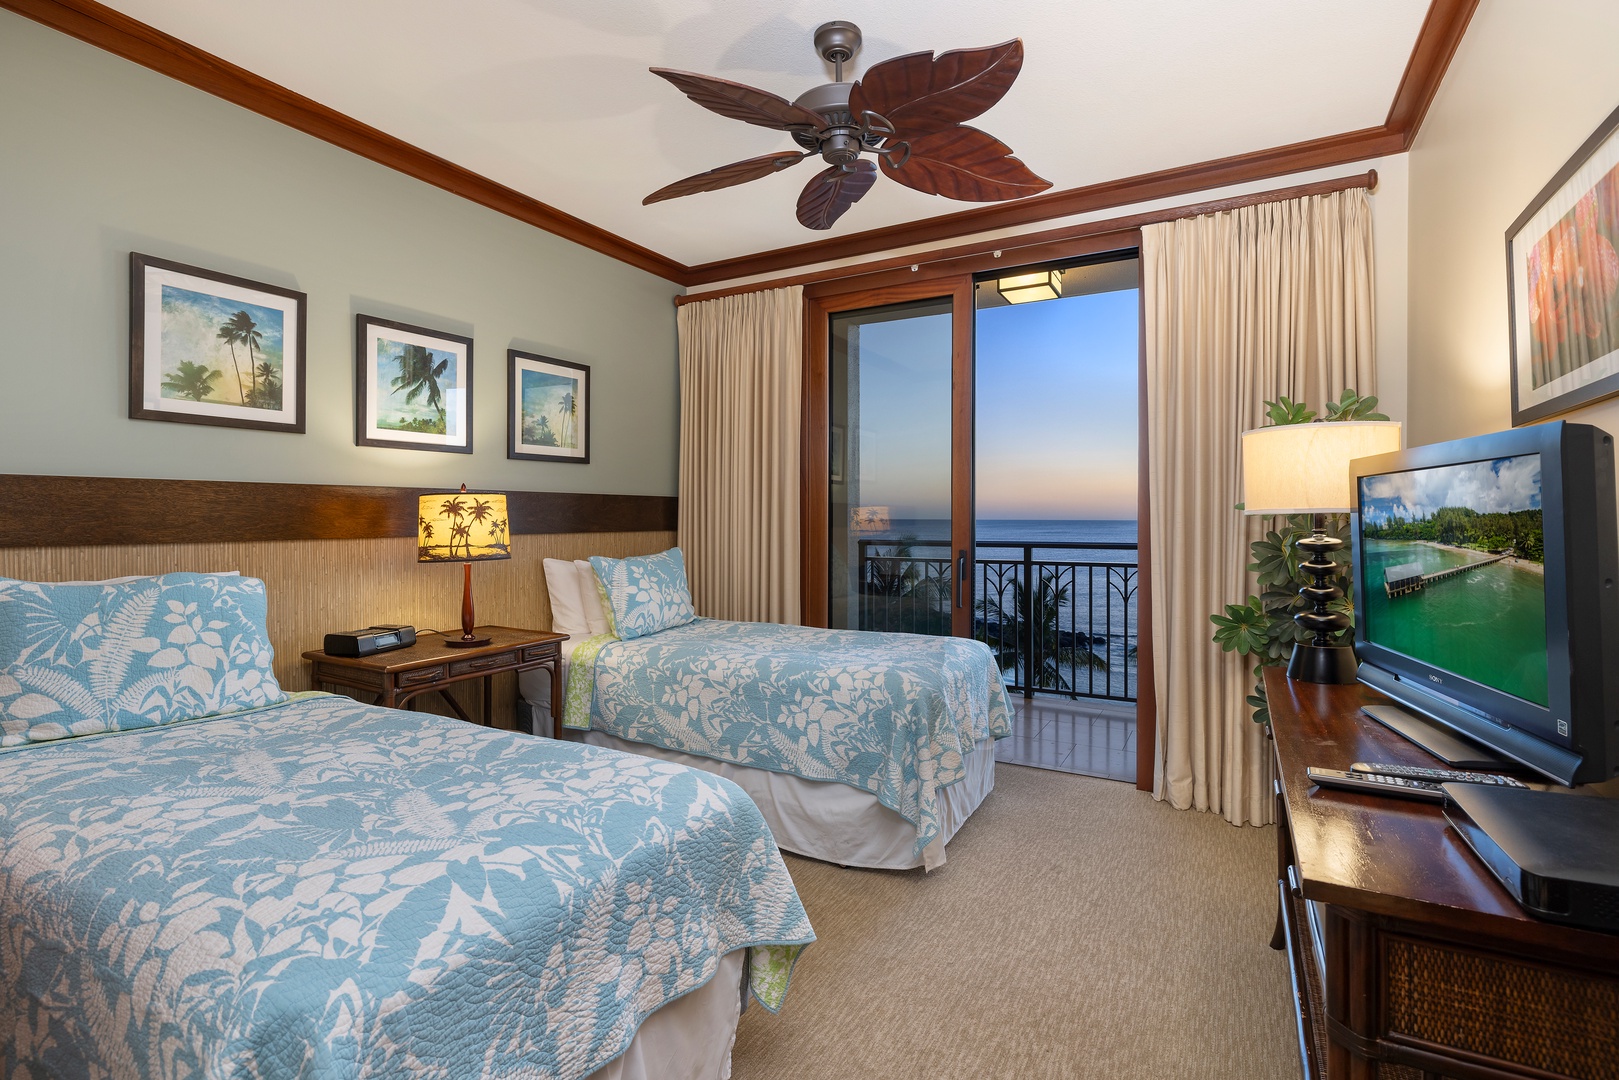 Kapolei Vacation Rentals, Ko Olina Beach Villas B610 - The second guest bedroom with lanai access and incredible scenery.